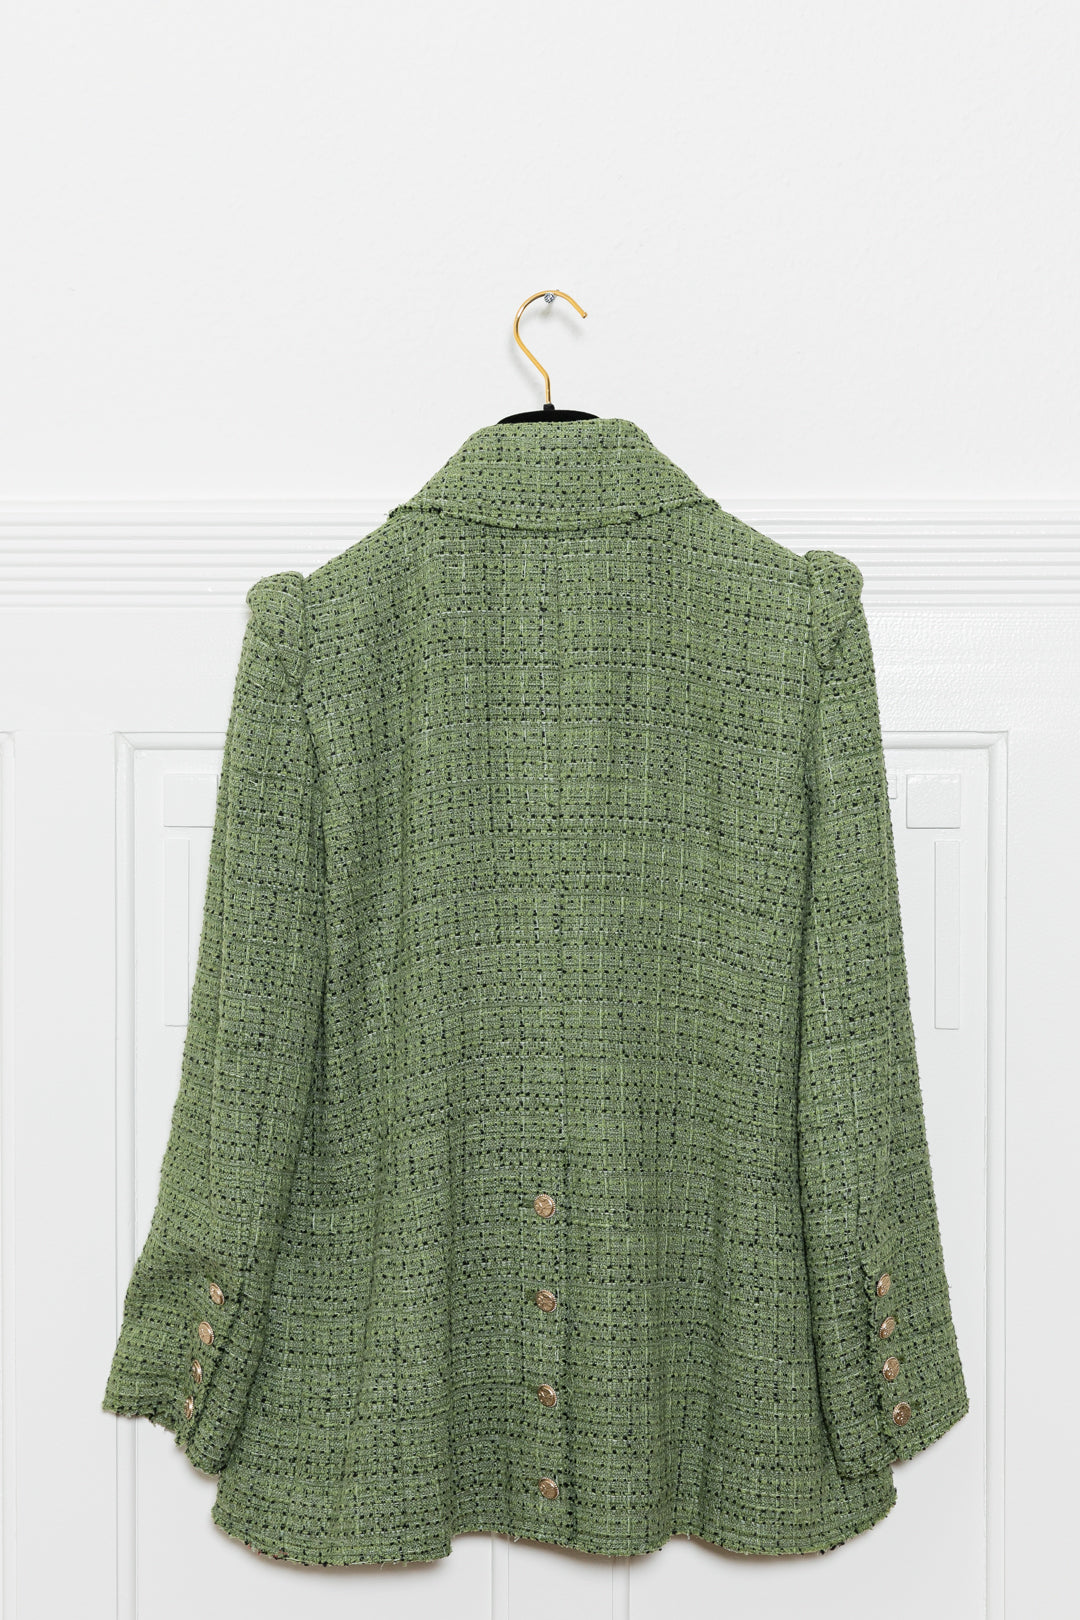 CHANEL Two Piece Tweed Green